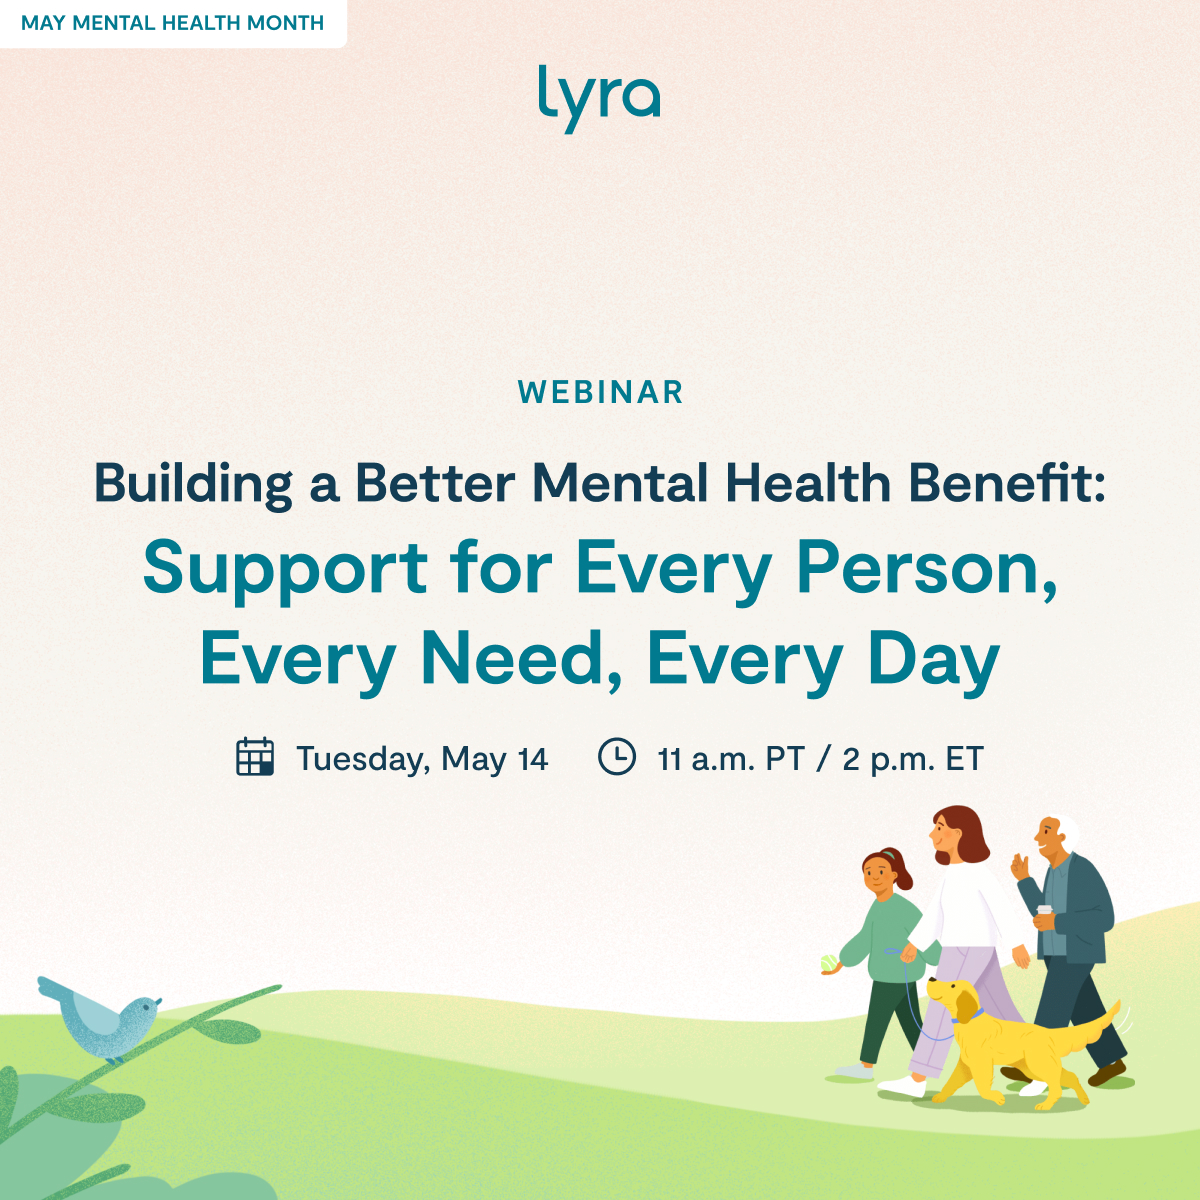 Join us for a #MentalHealthAwarenessMonth webinar on May 14 to explore ways Lyra can help your company address today’s most critical mental health challenges. Register here: bit.ly/3JKnRAc. 📆